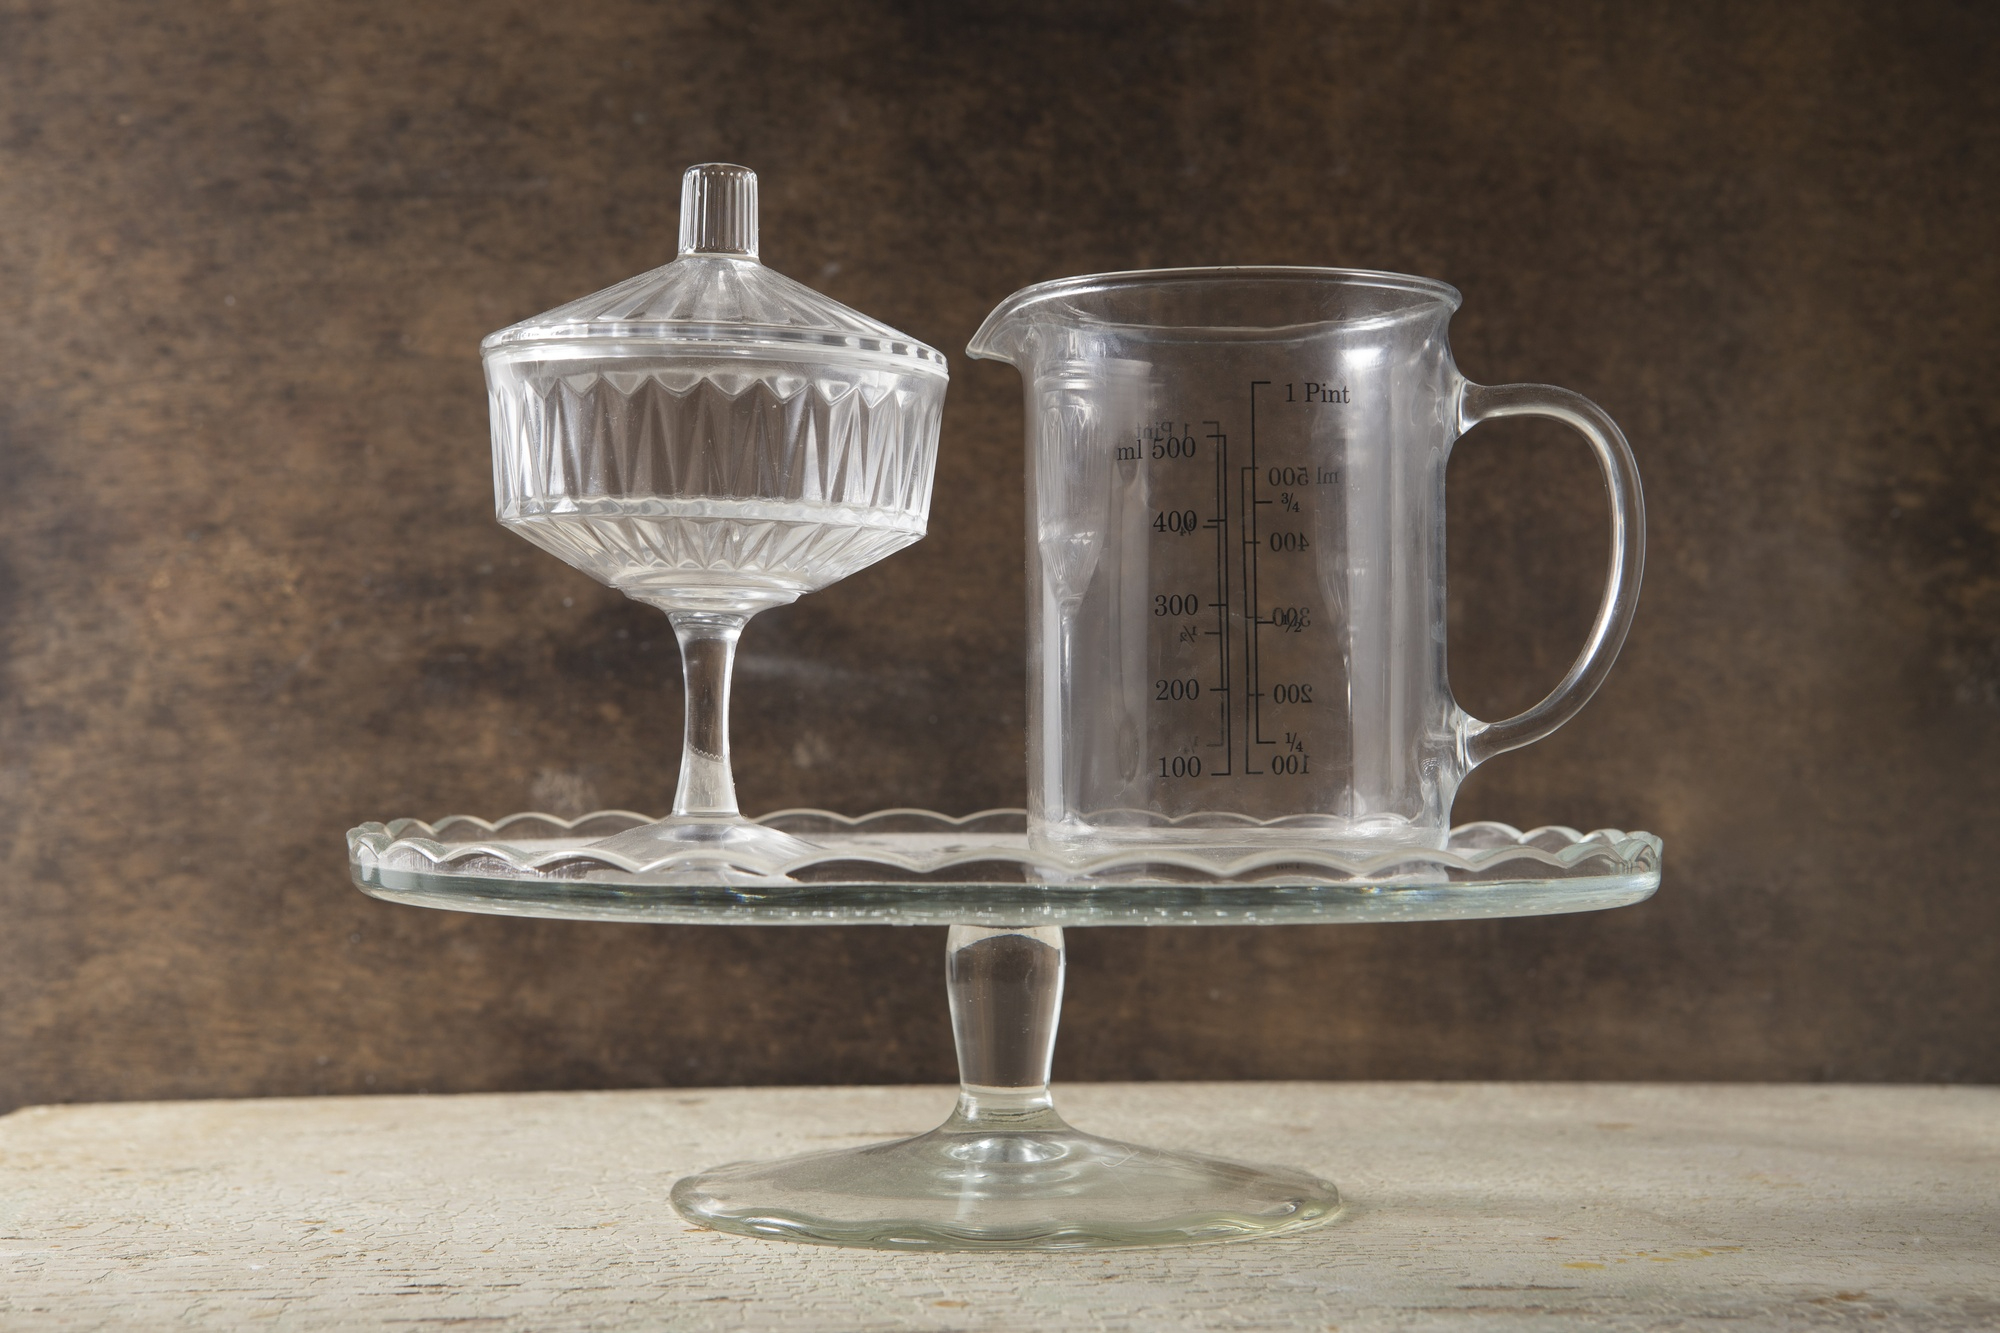 A measuring jug sitting with other baking tools | Source: Freepik